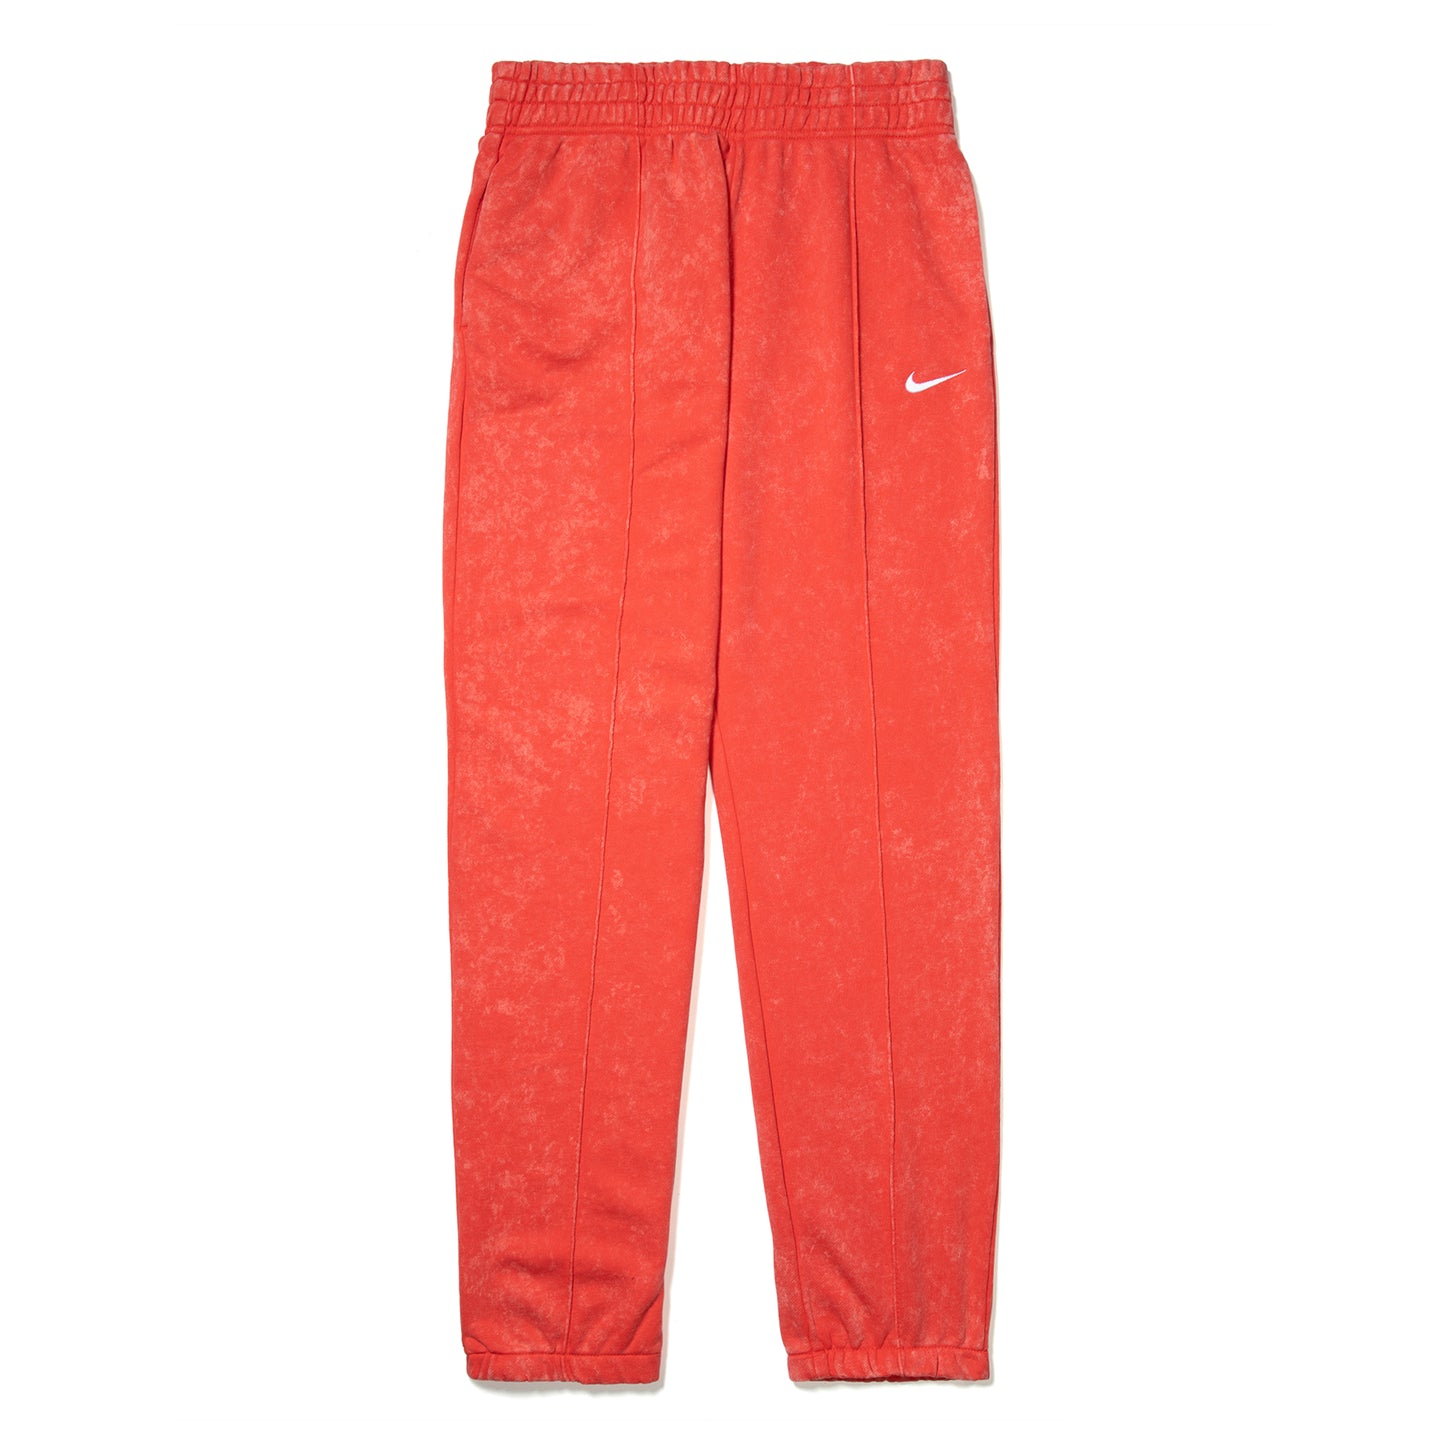 Nike Womens Washed Fleece Pants (Chile Red/White)